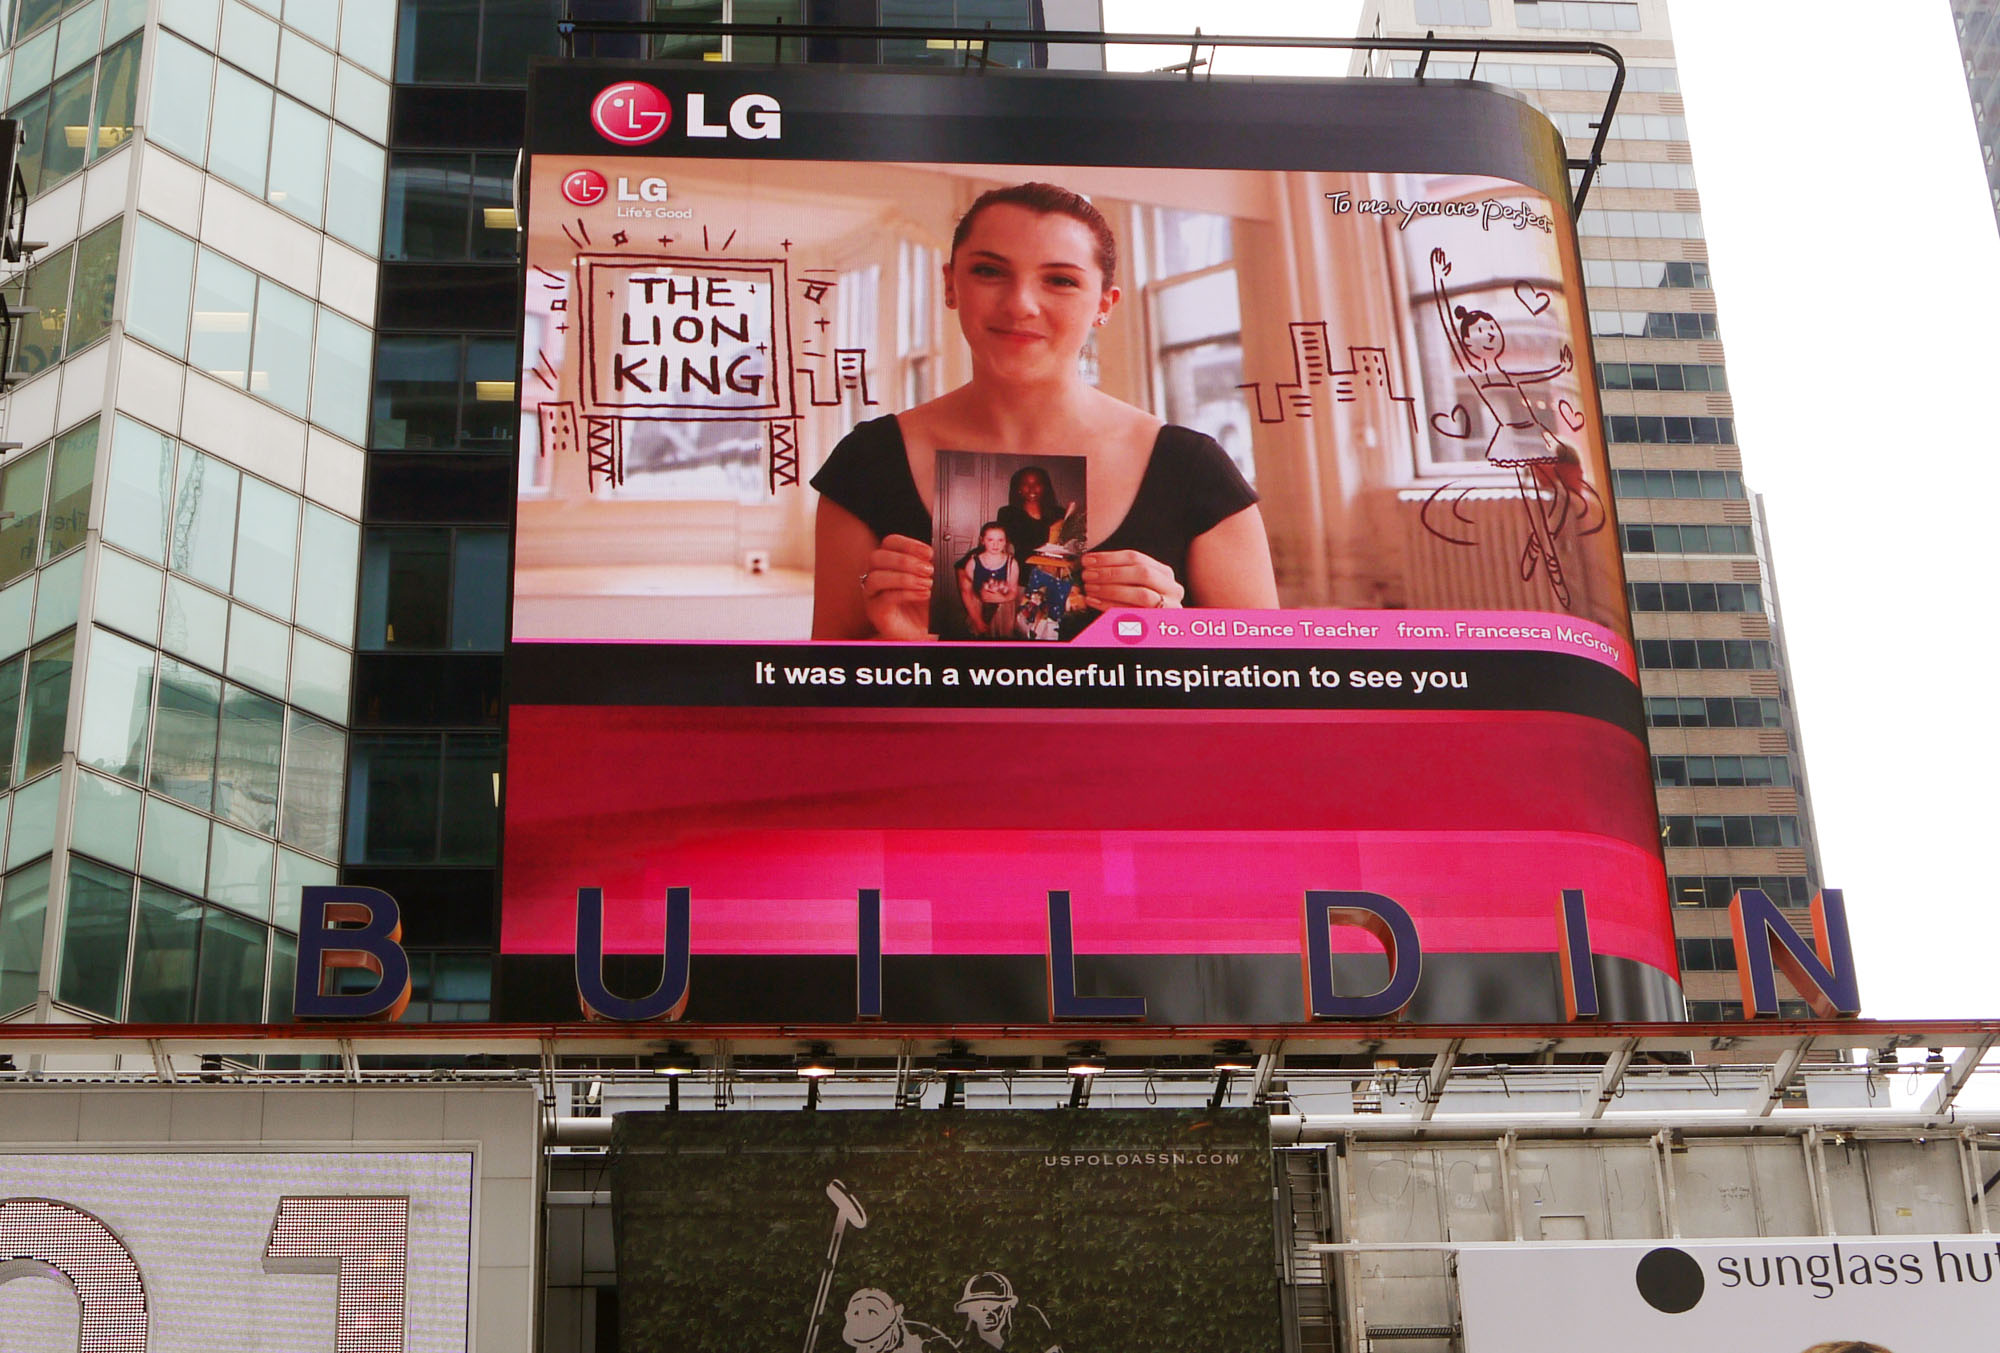 A Times Square billboard saying “To me, you are perfect. From G”